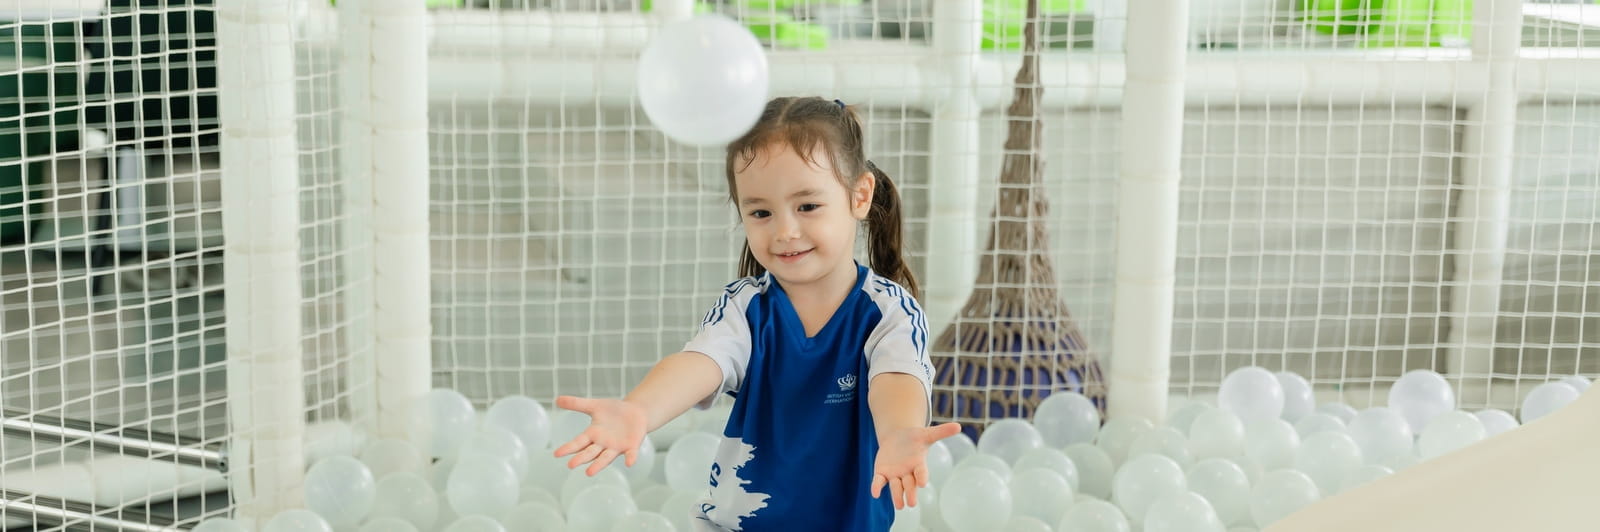 Early Years School in HCMC | BVIS HCMC -Content Page Header-BVIS HCMC Chuong trinh Mam non Quoc te EYFS